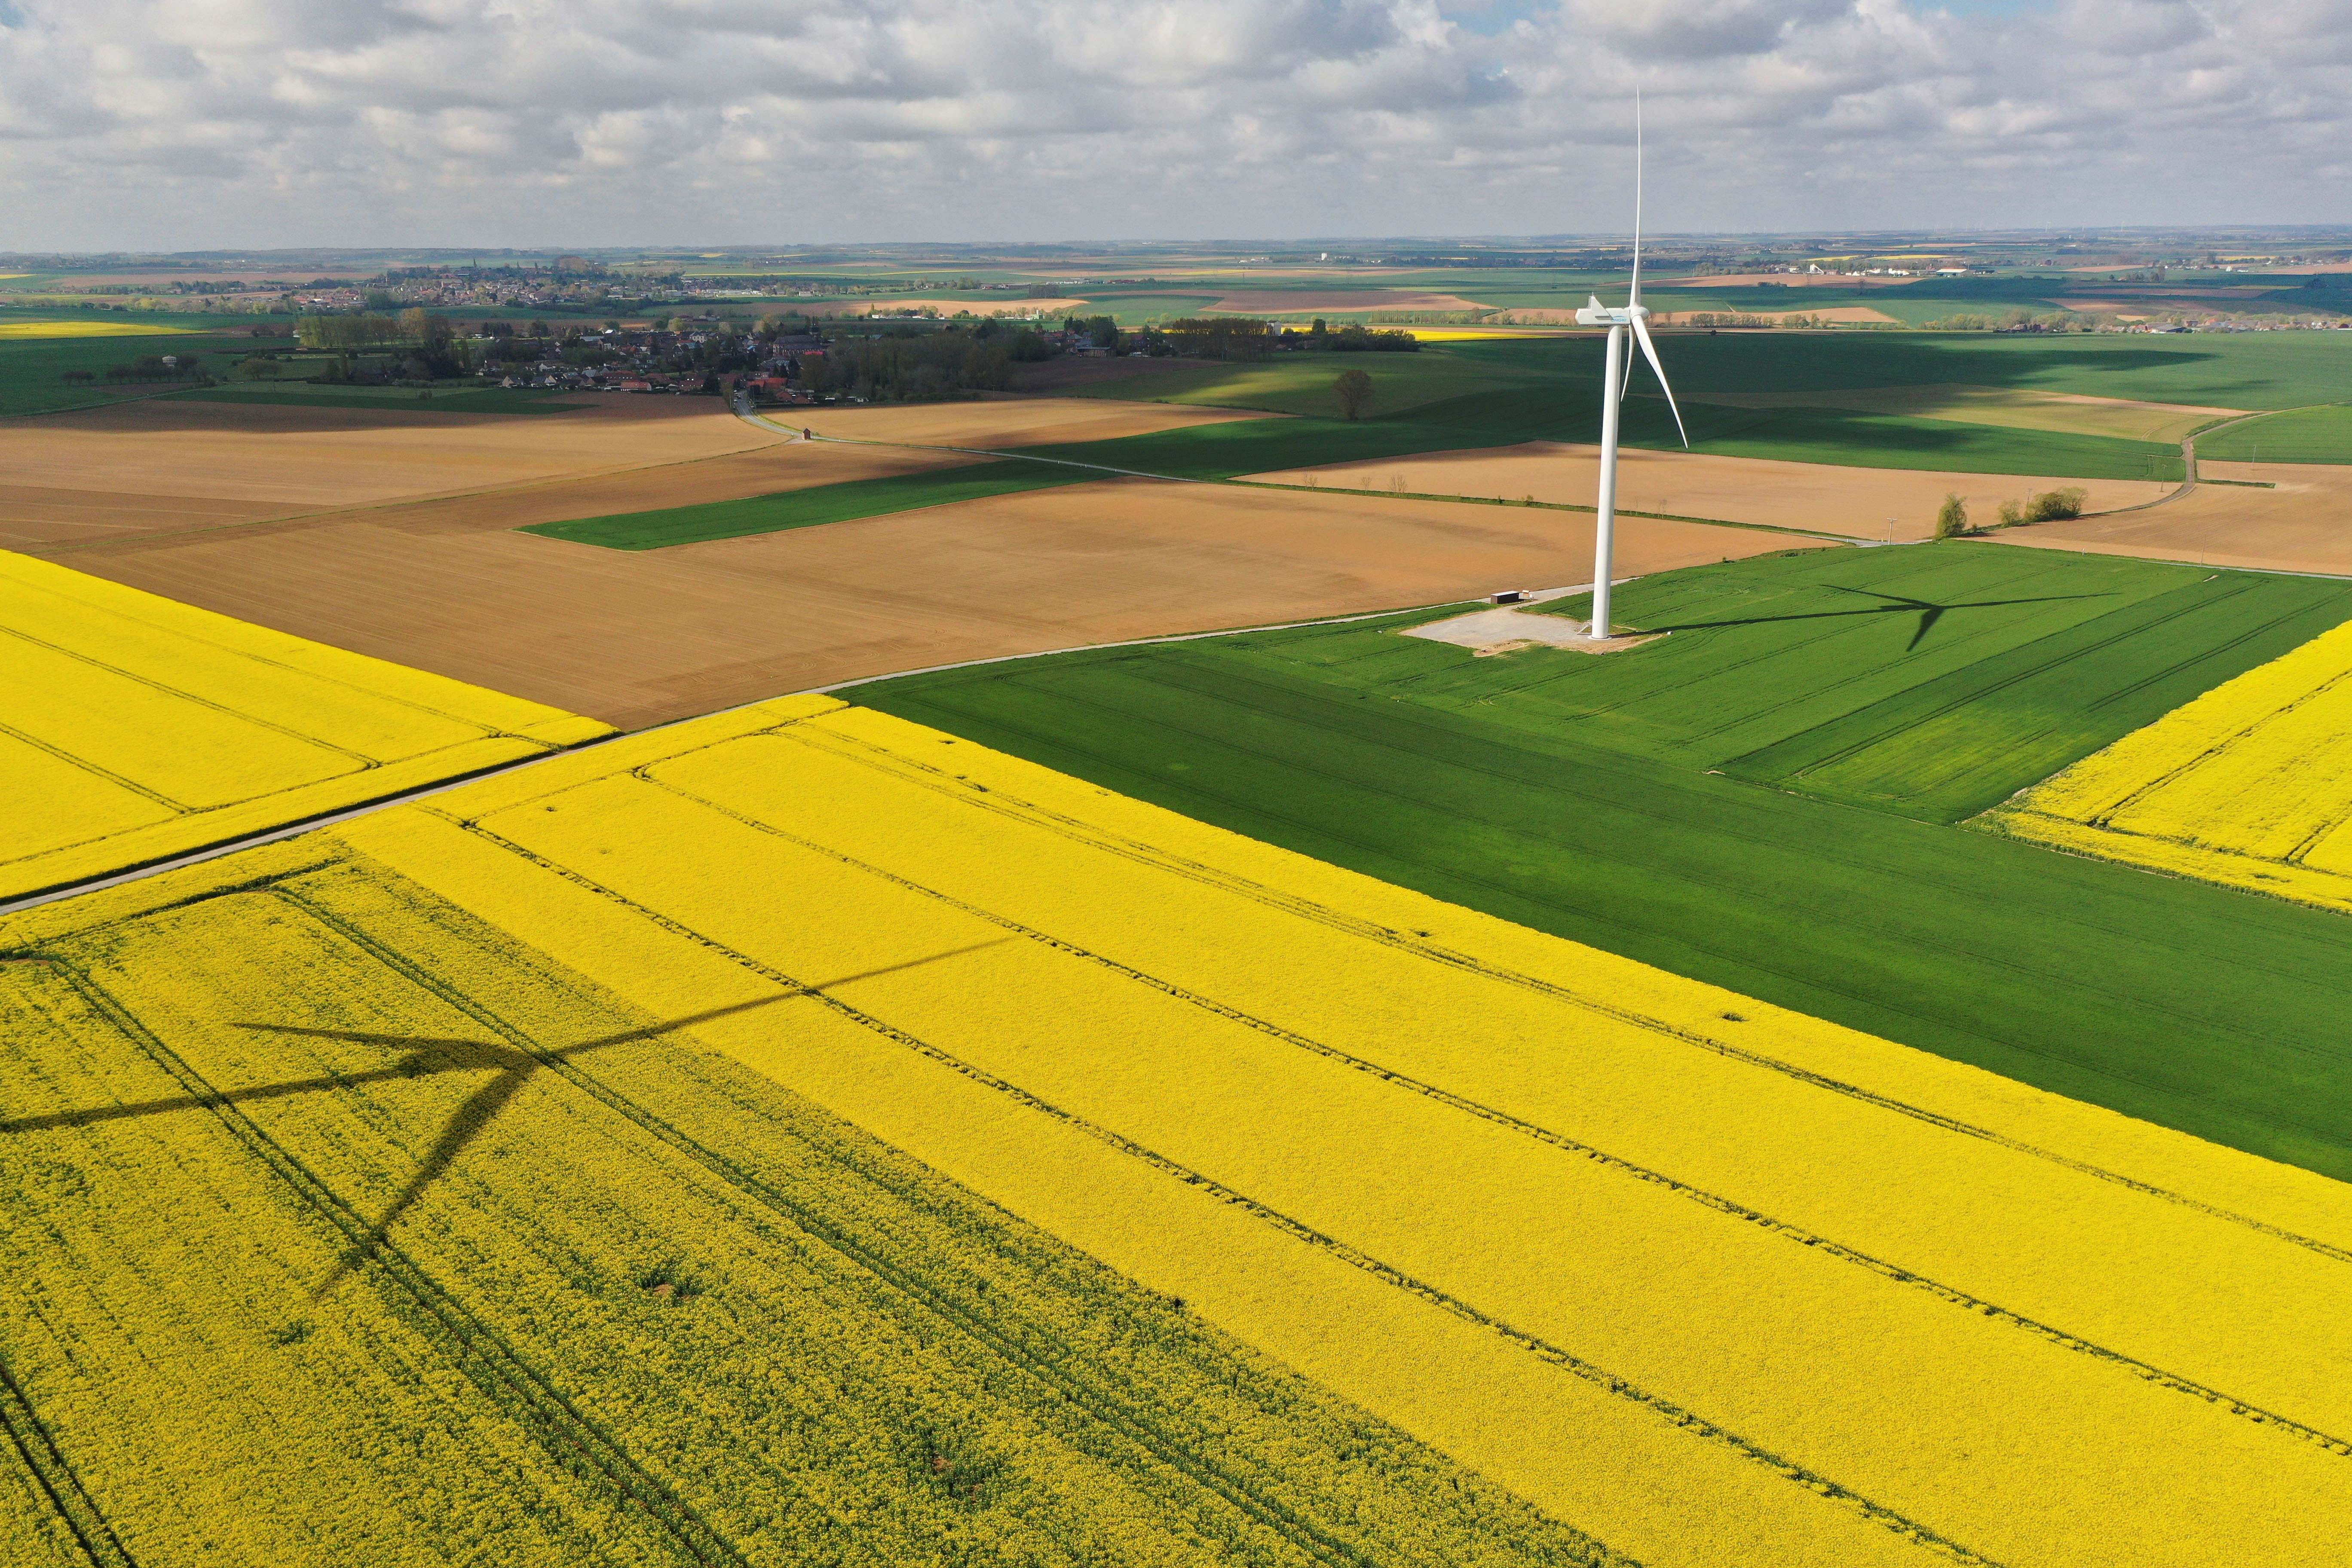 Aerial view shows power-generating windmill turbine amidst rapeseed fields, in Saint-Hilaire-lez-Cambrai